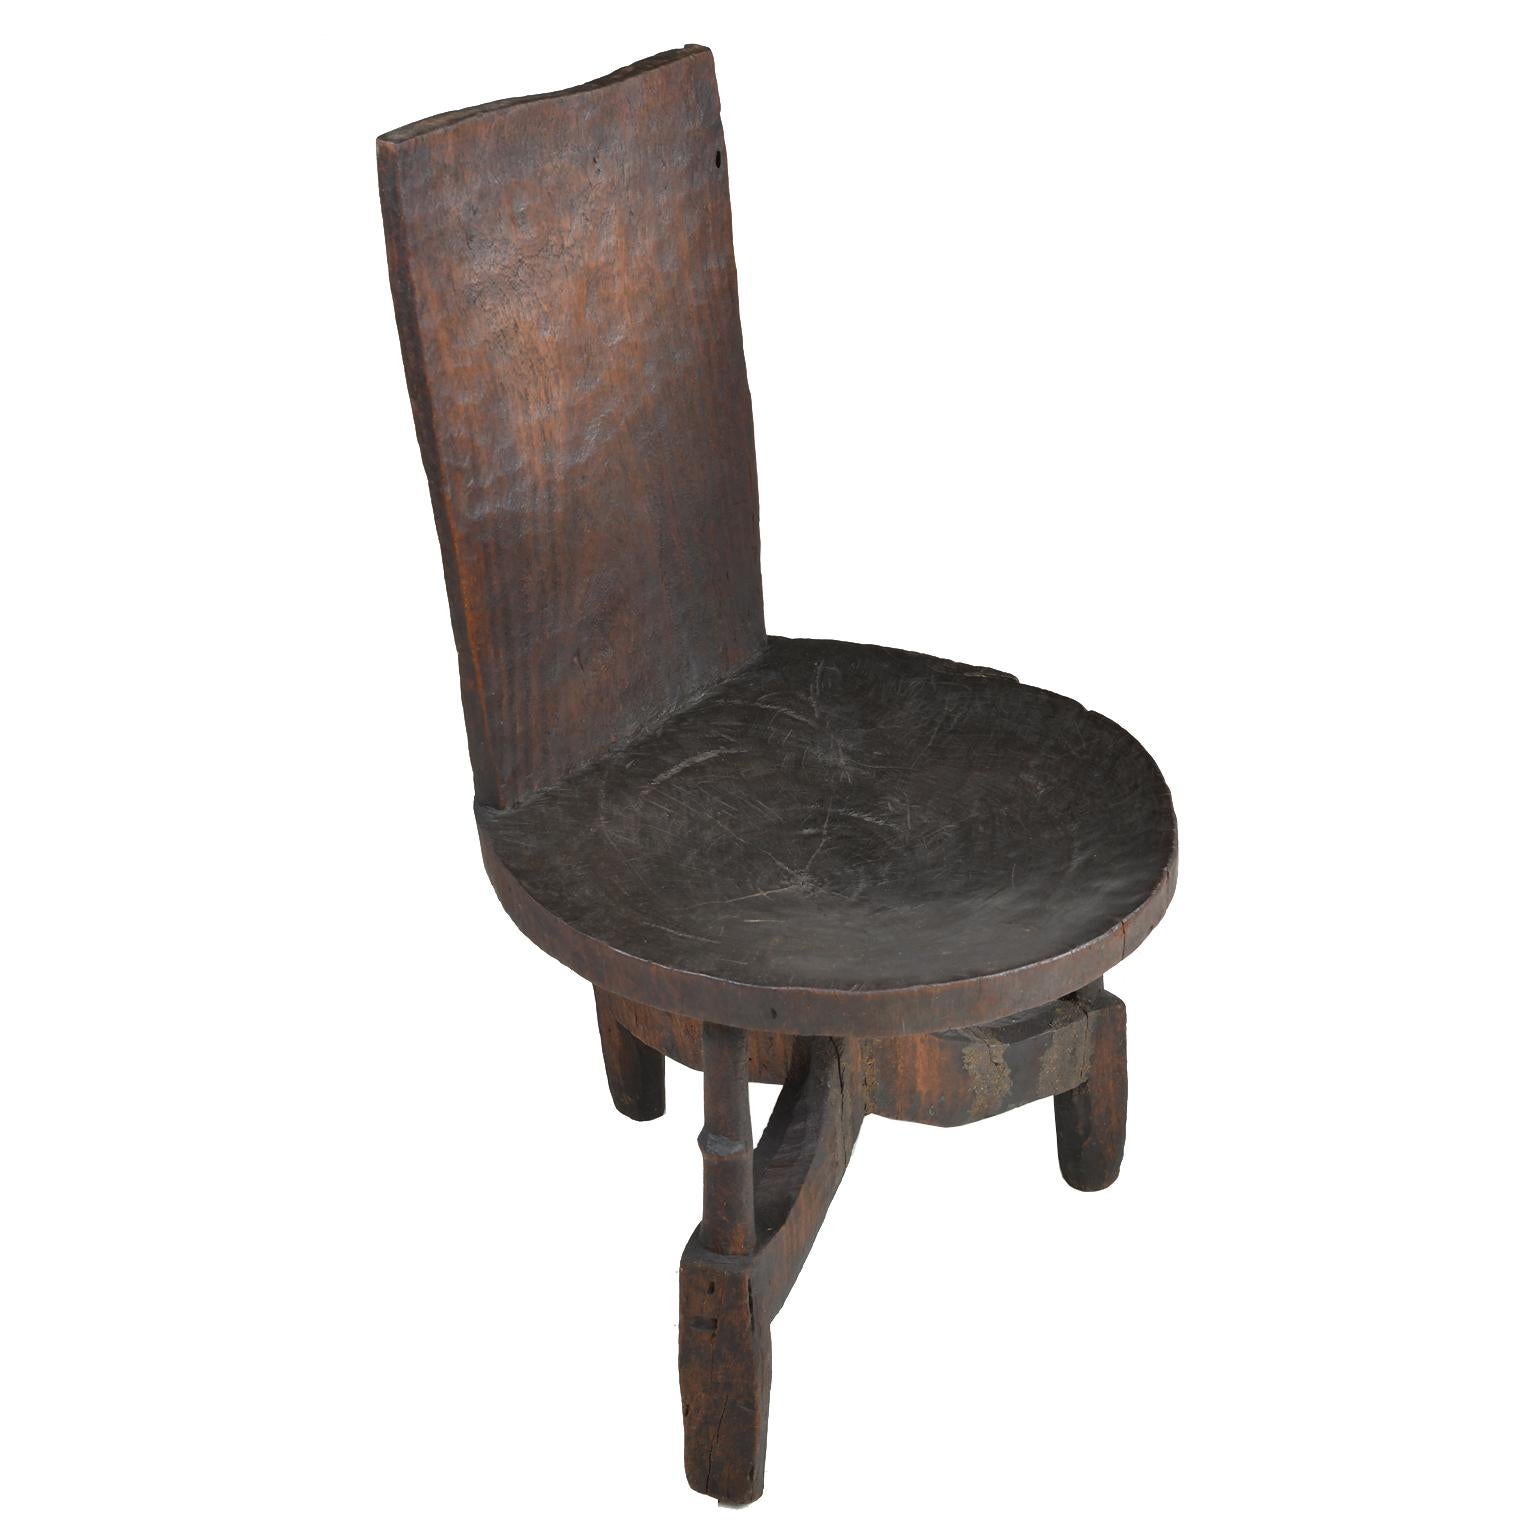 Wood African Chieftain Chair from Oromo People in Ethiopia, circa Early 1900s For Sale